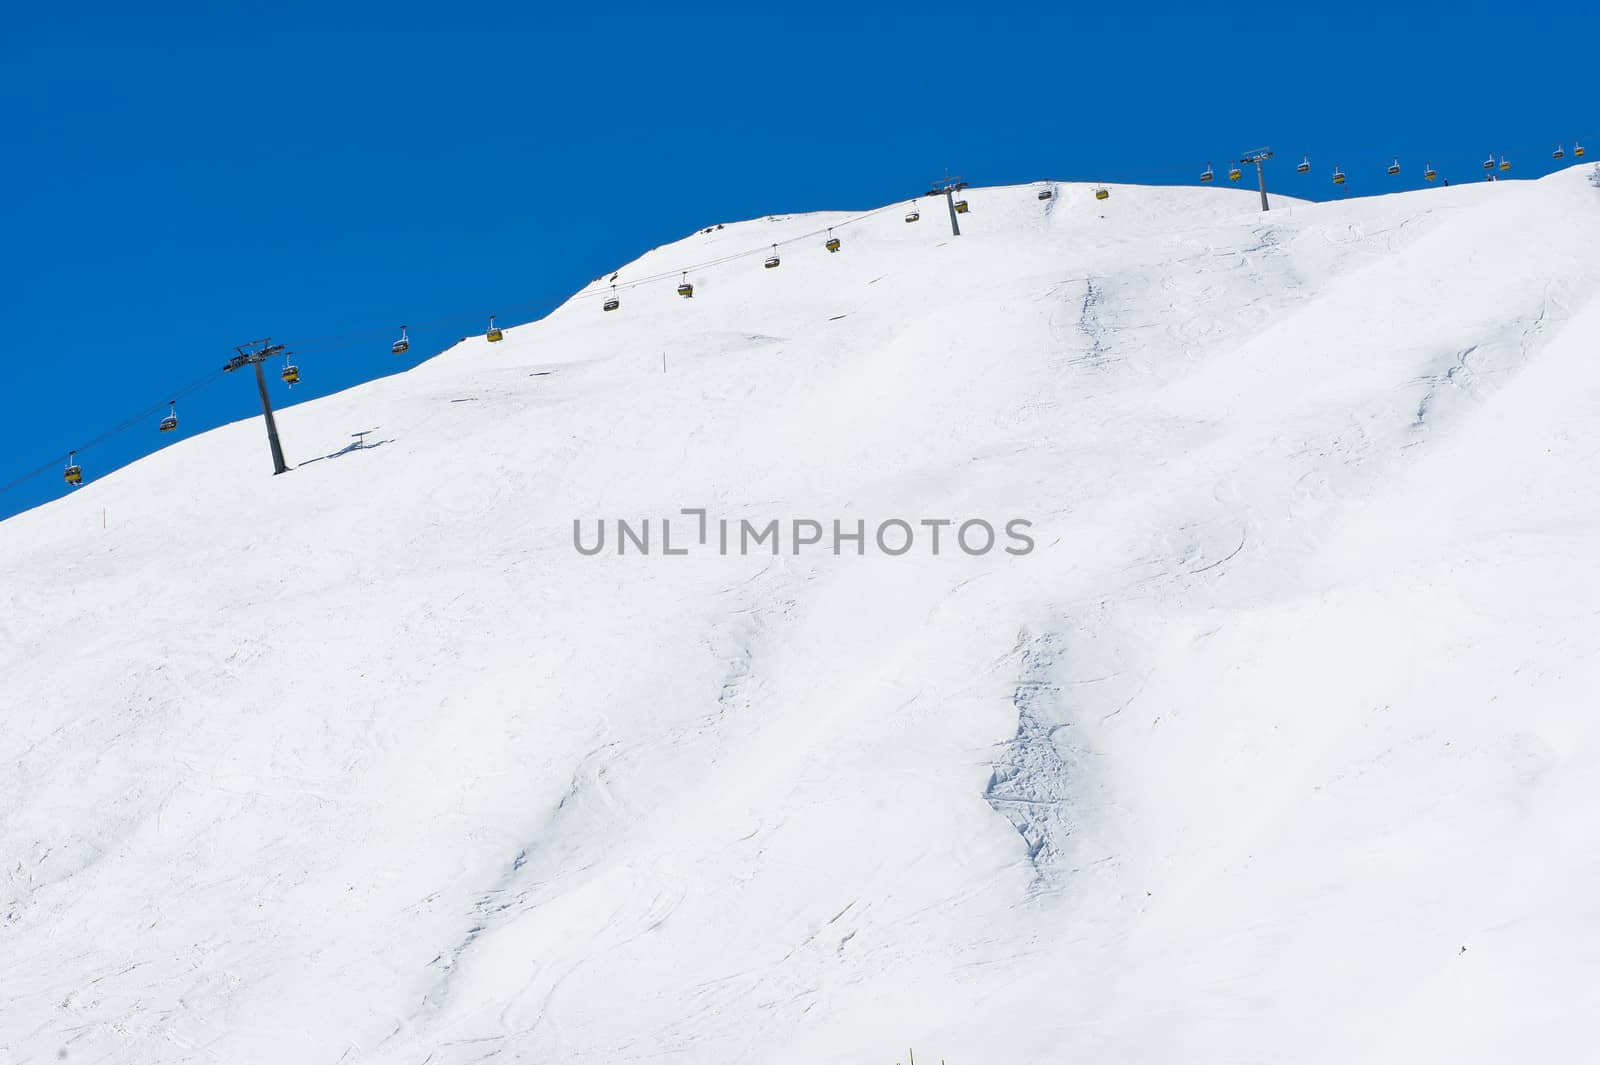 Chairlift along Ski Slope by ocusfocus